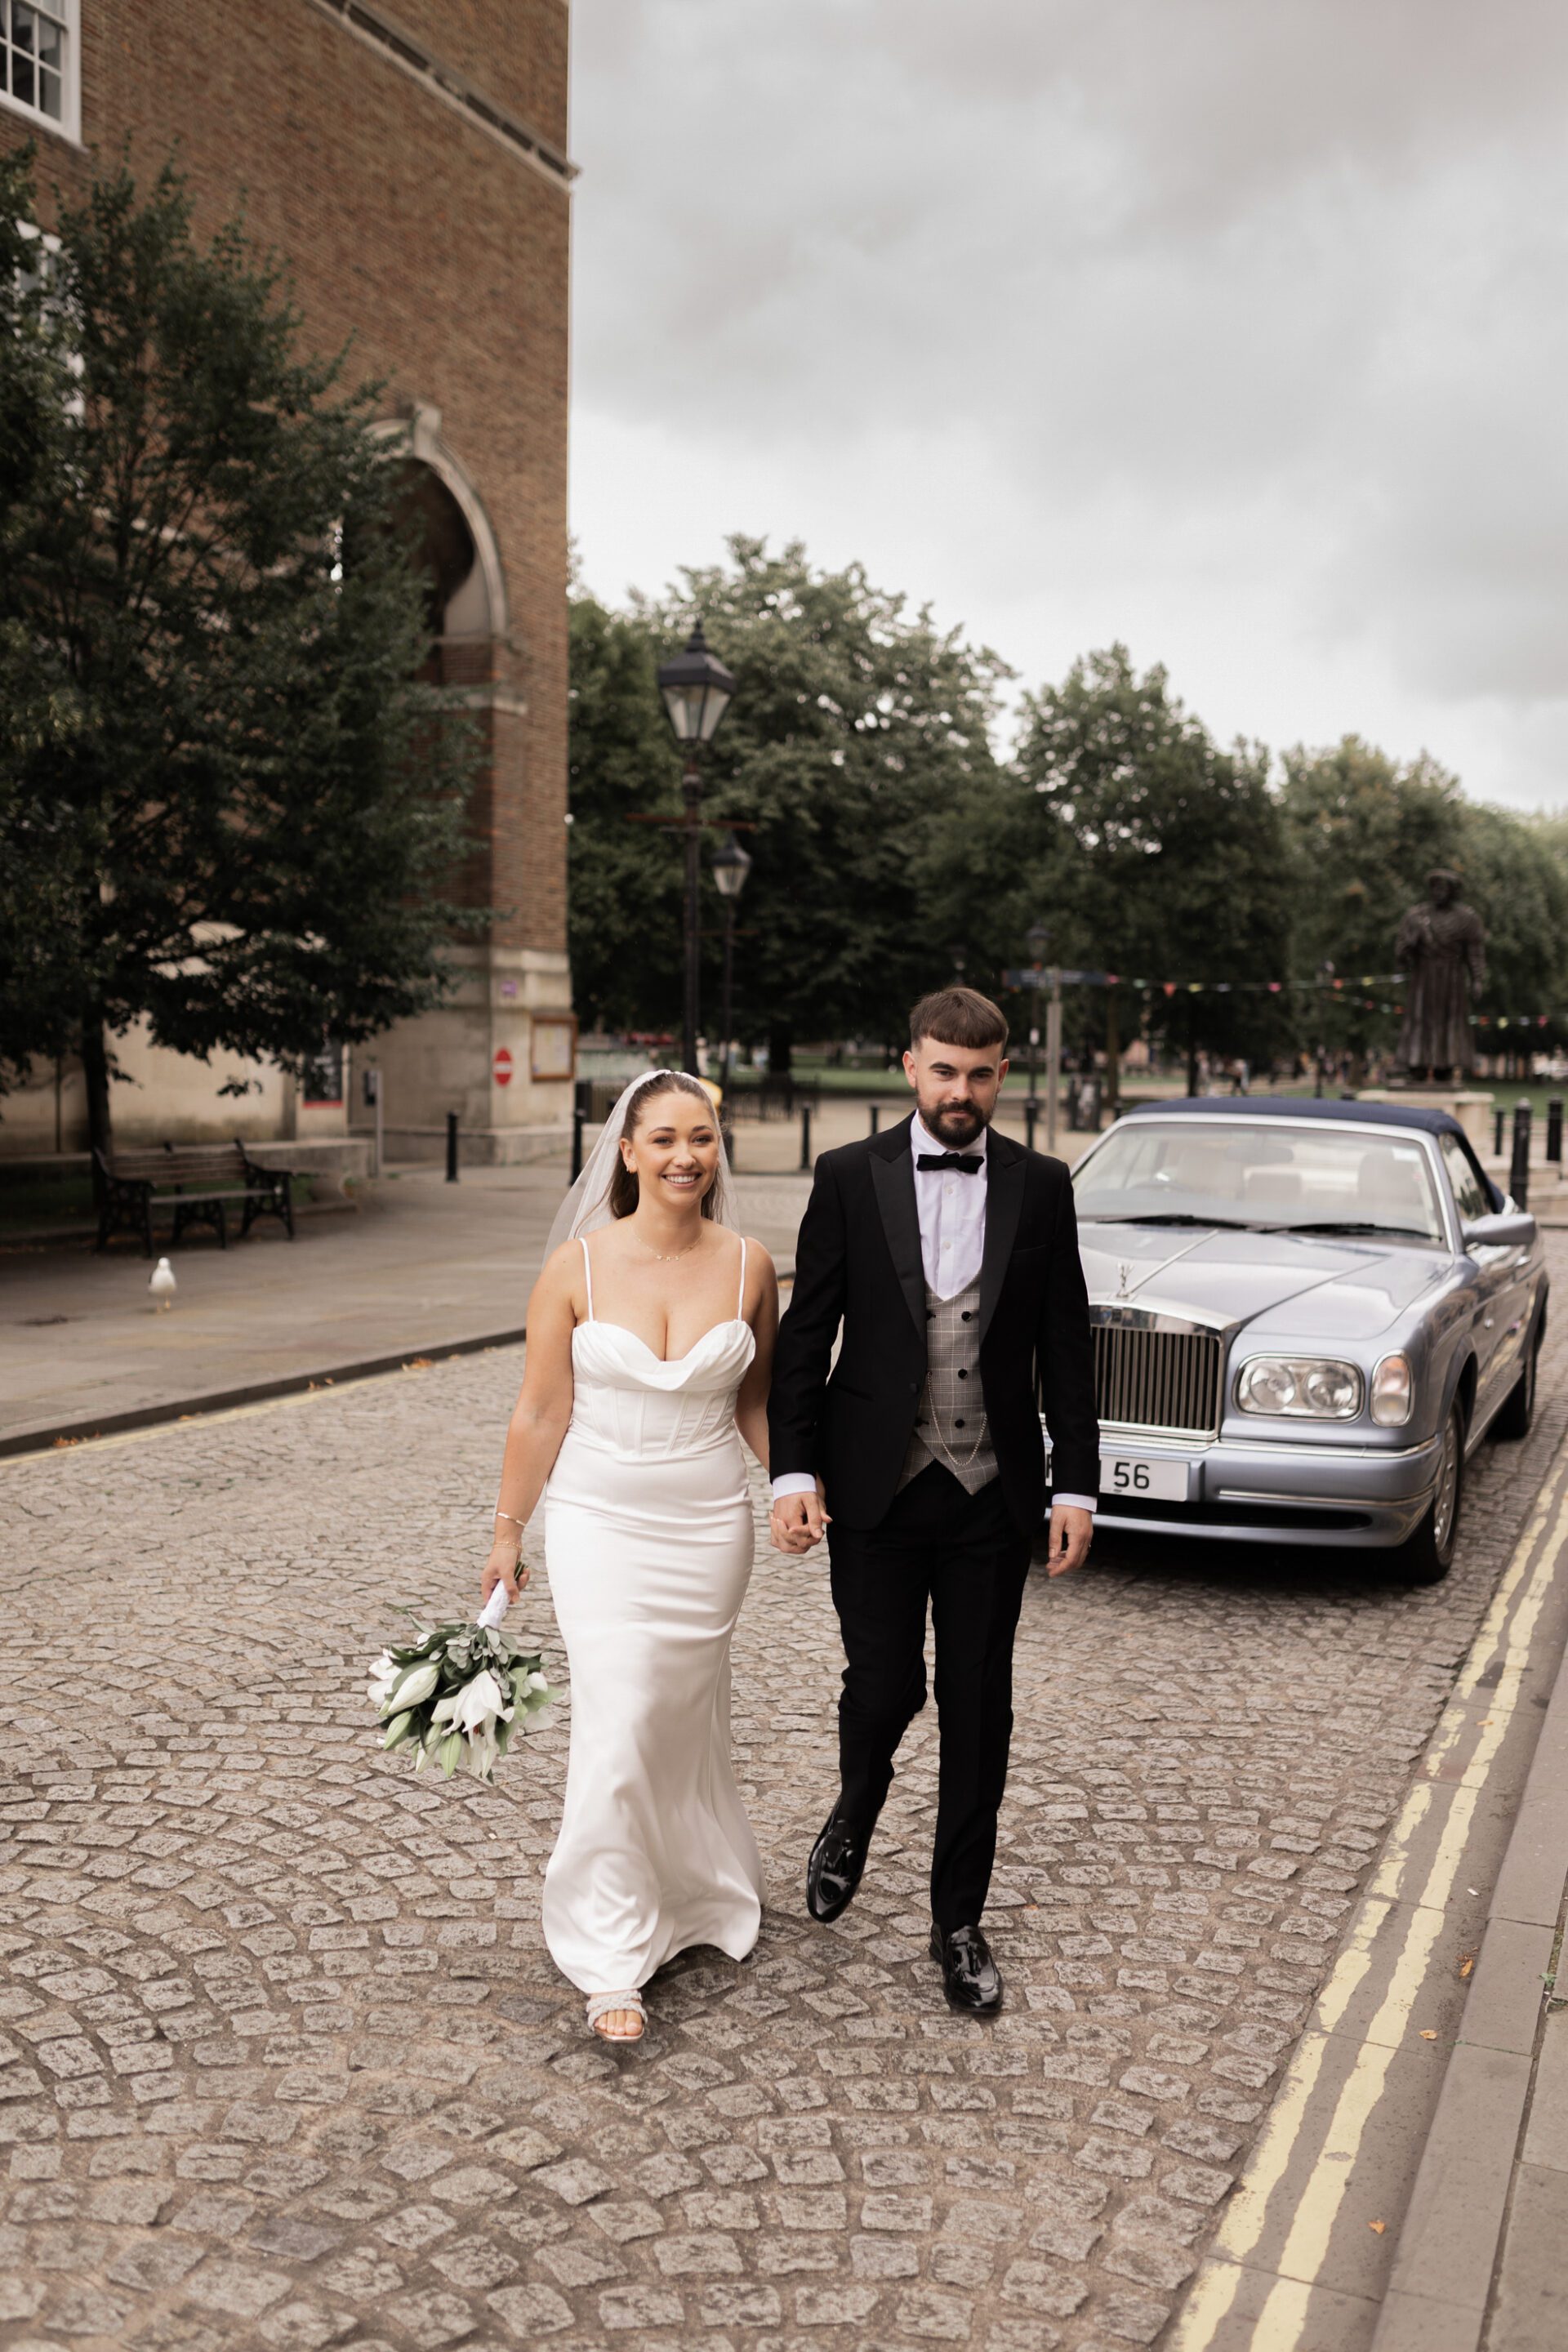 The bride and groom explore the centre of Bristol during their couple portrait session